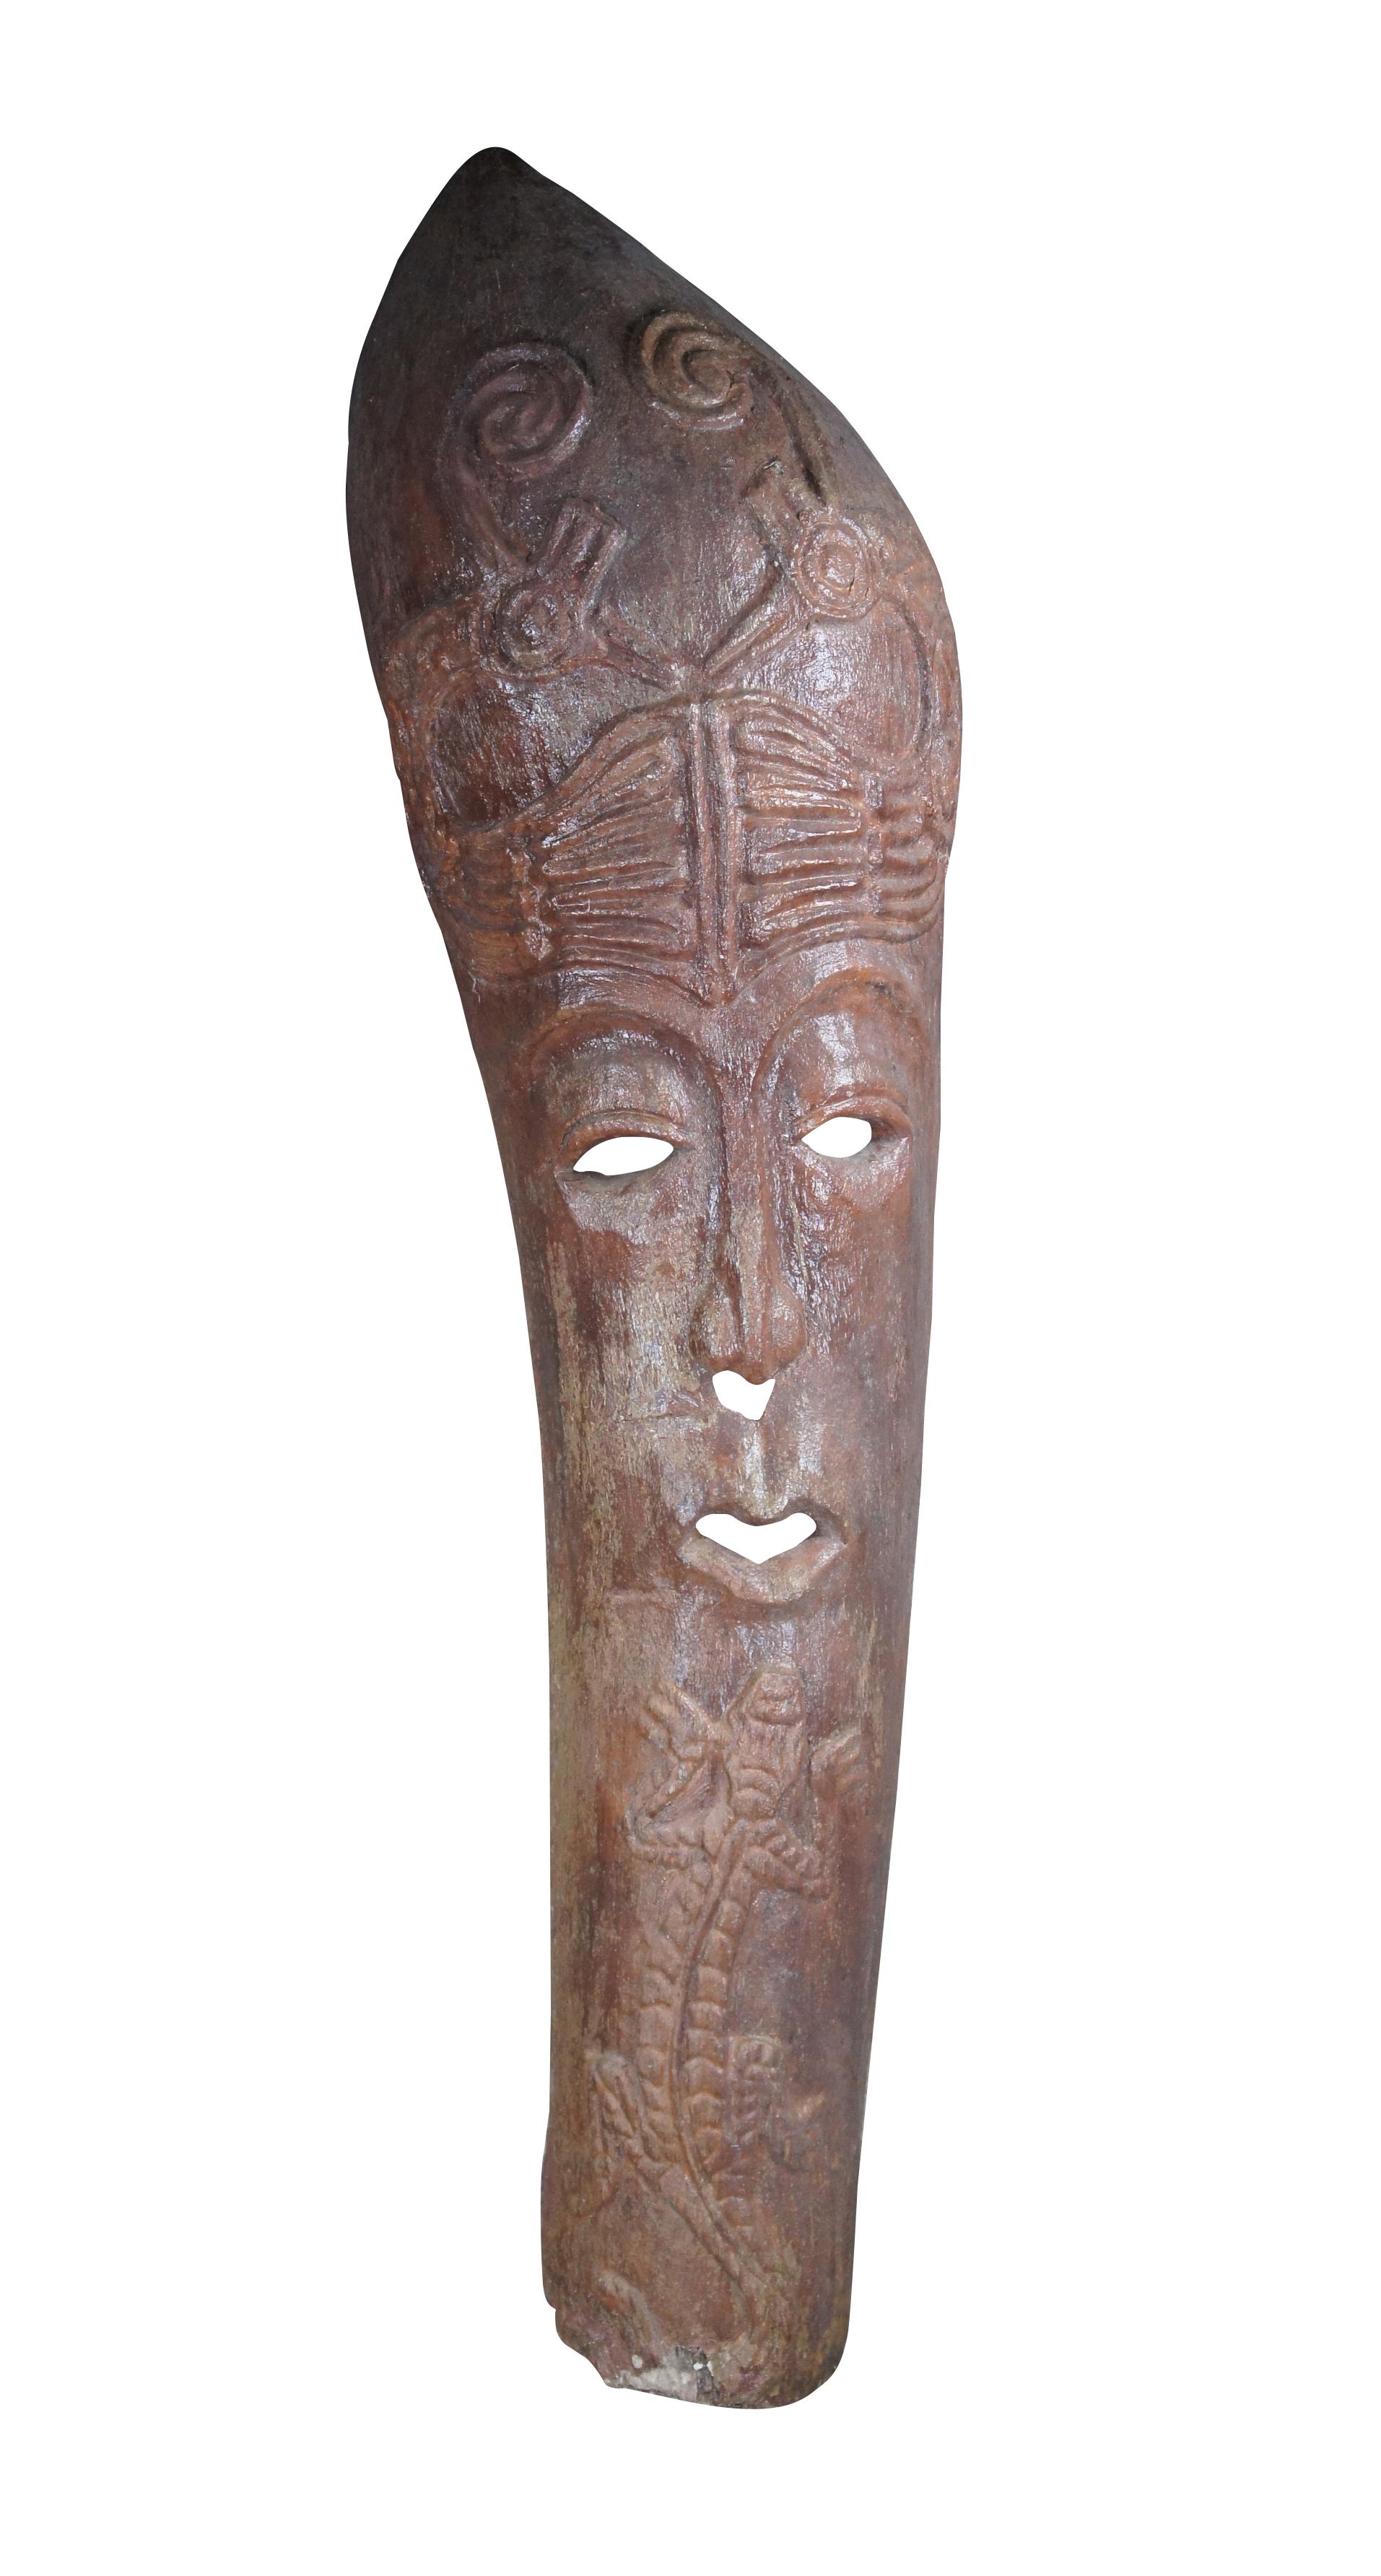 Large vintage Balinese style tiki hut tribal mask or statue. Made of a composite material in the form of an old Palm trunk featuring a large elongated face with a gecko / lizard and birds.